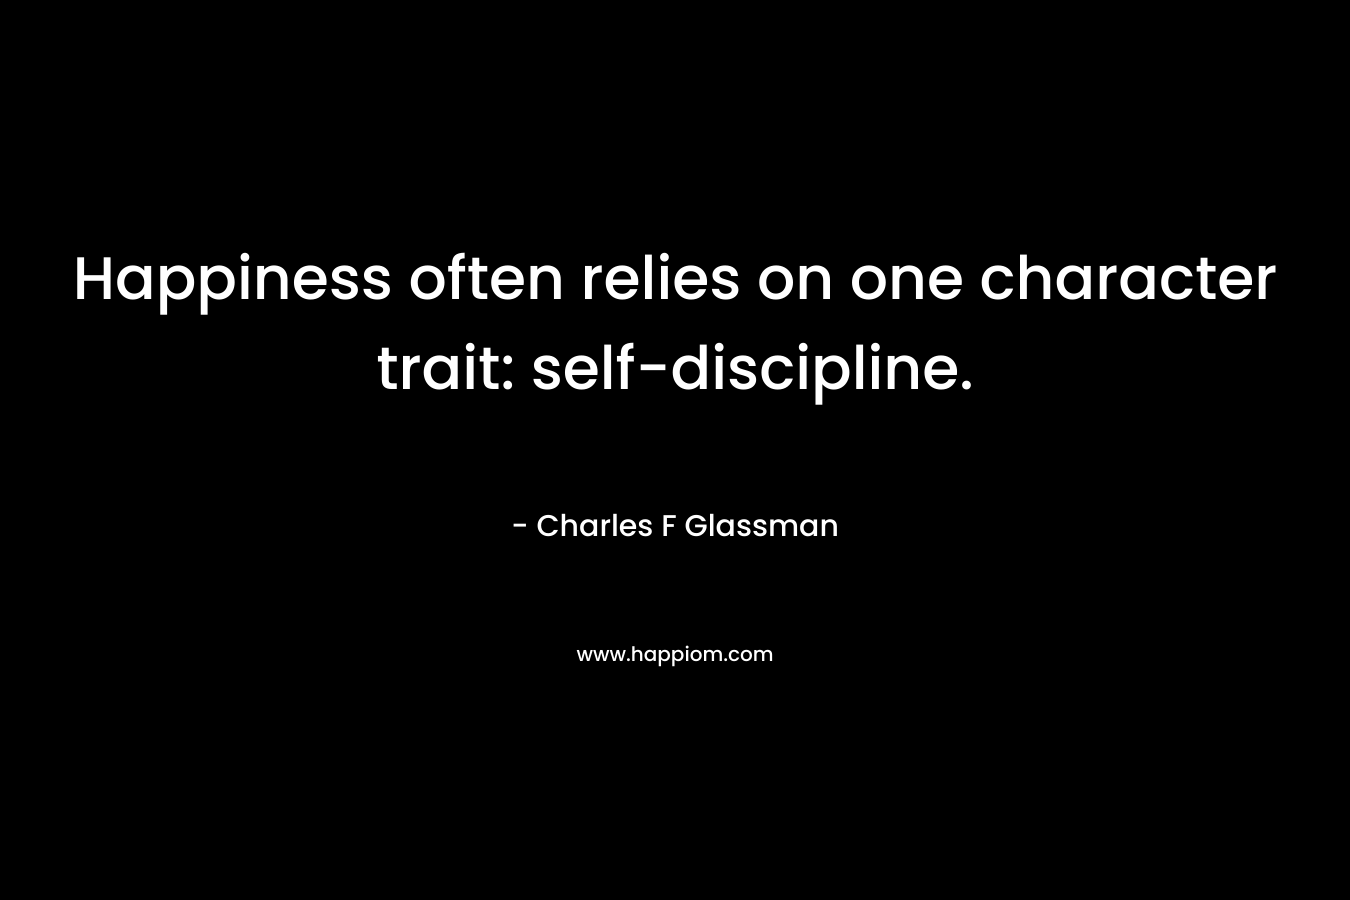 Happiness often relies on one character trait: self-discipline. – Charles F Glassman